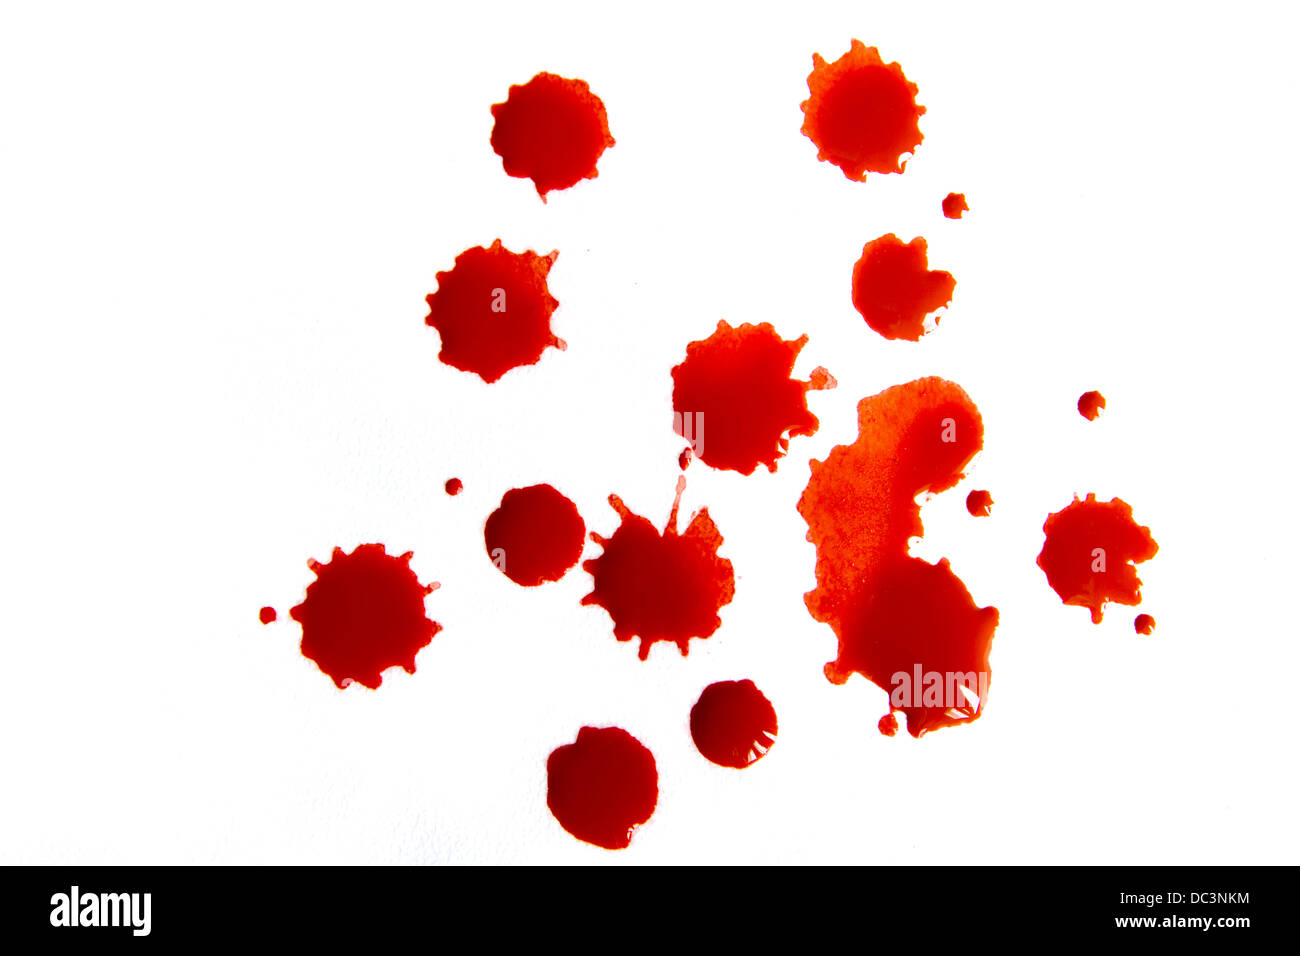 Blood droplets (stains, splatter) islated on white background close up Stock Photo